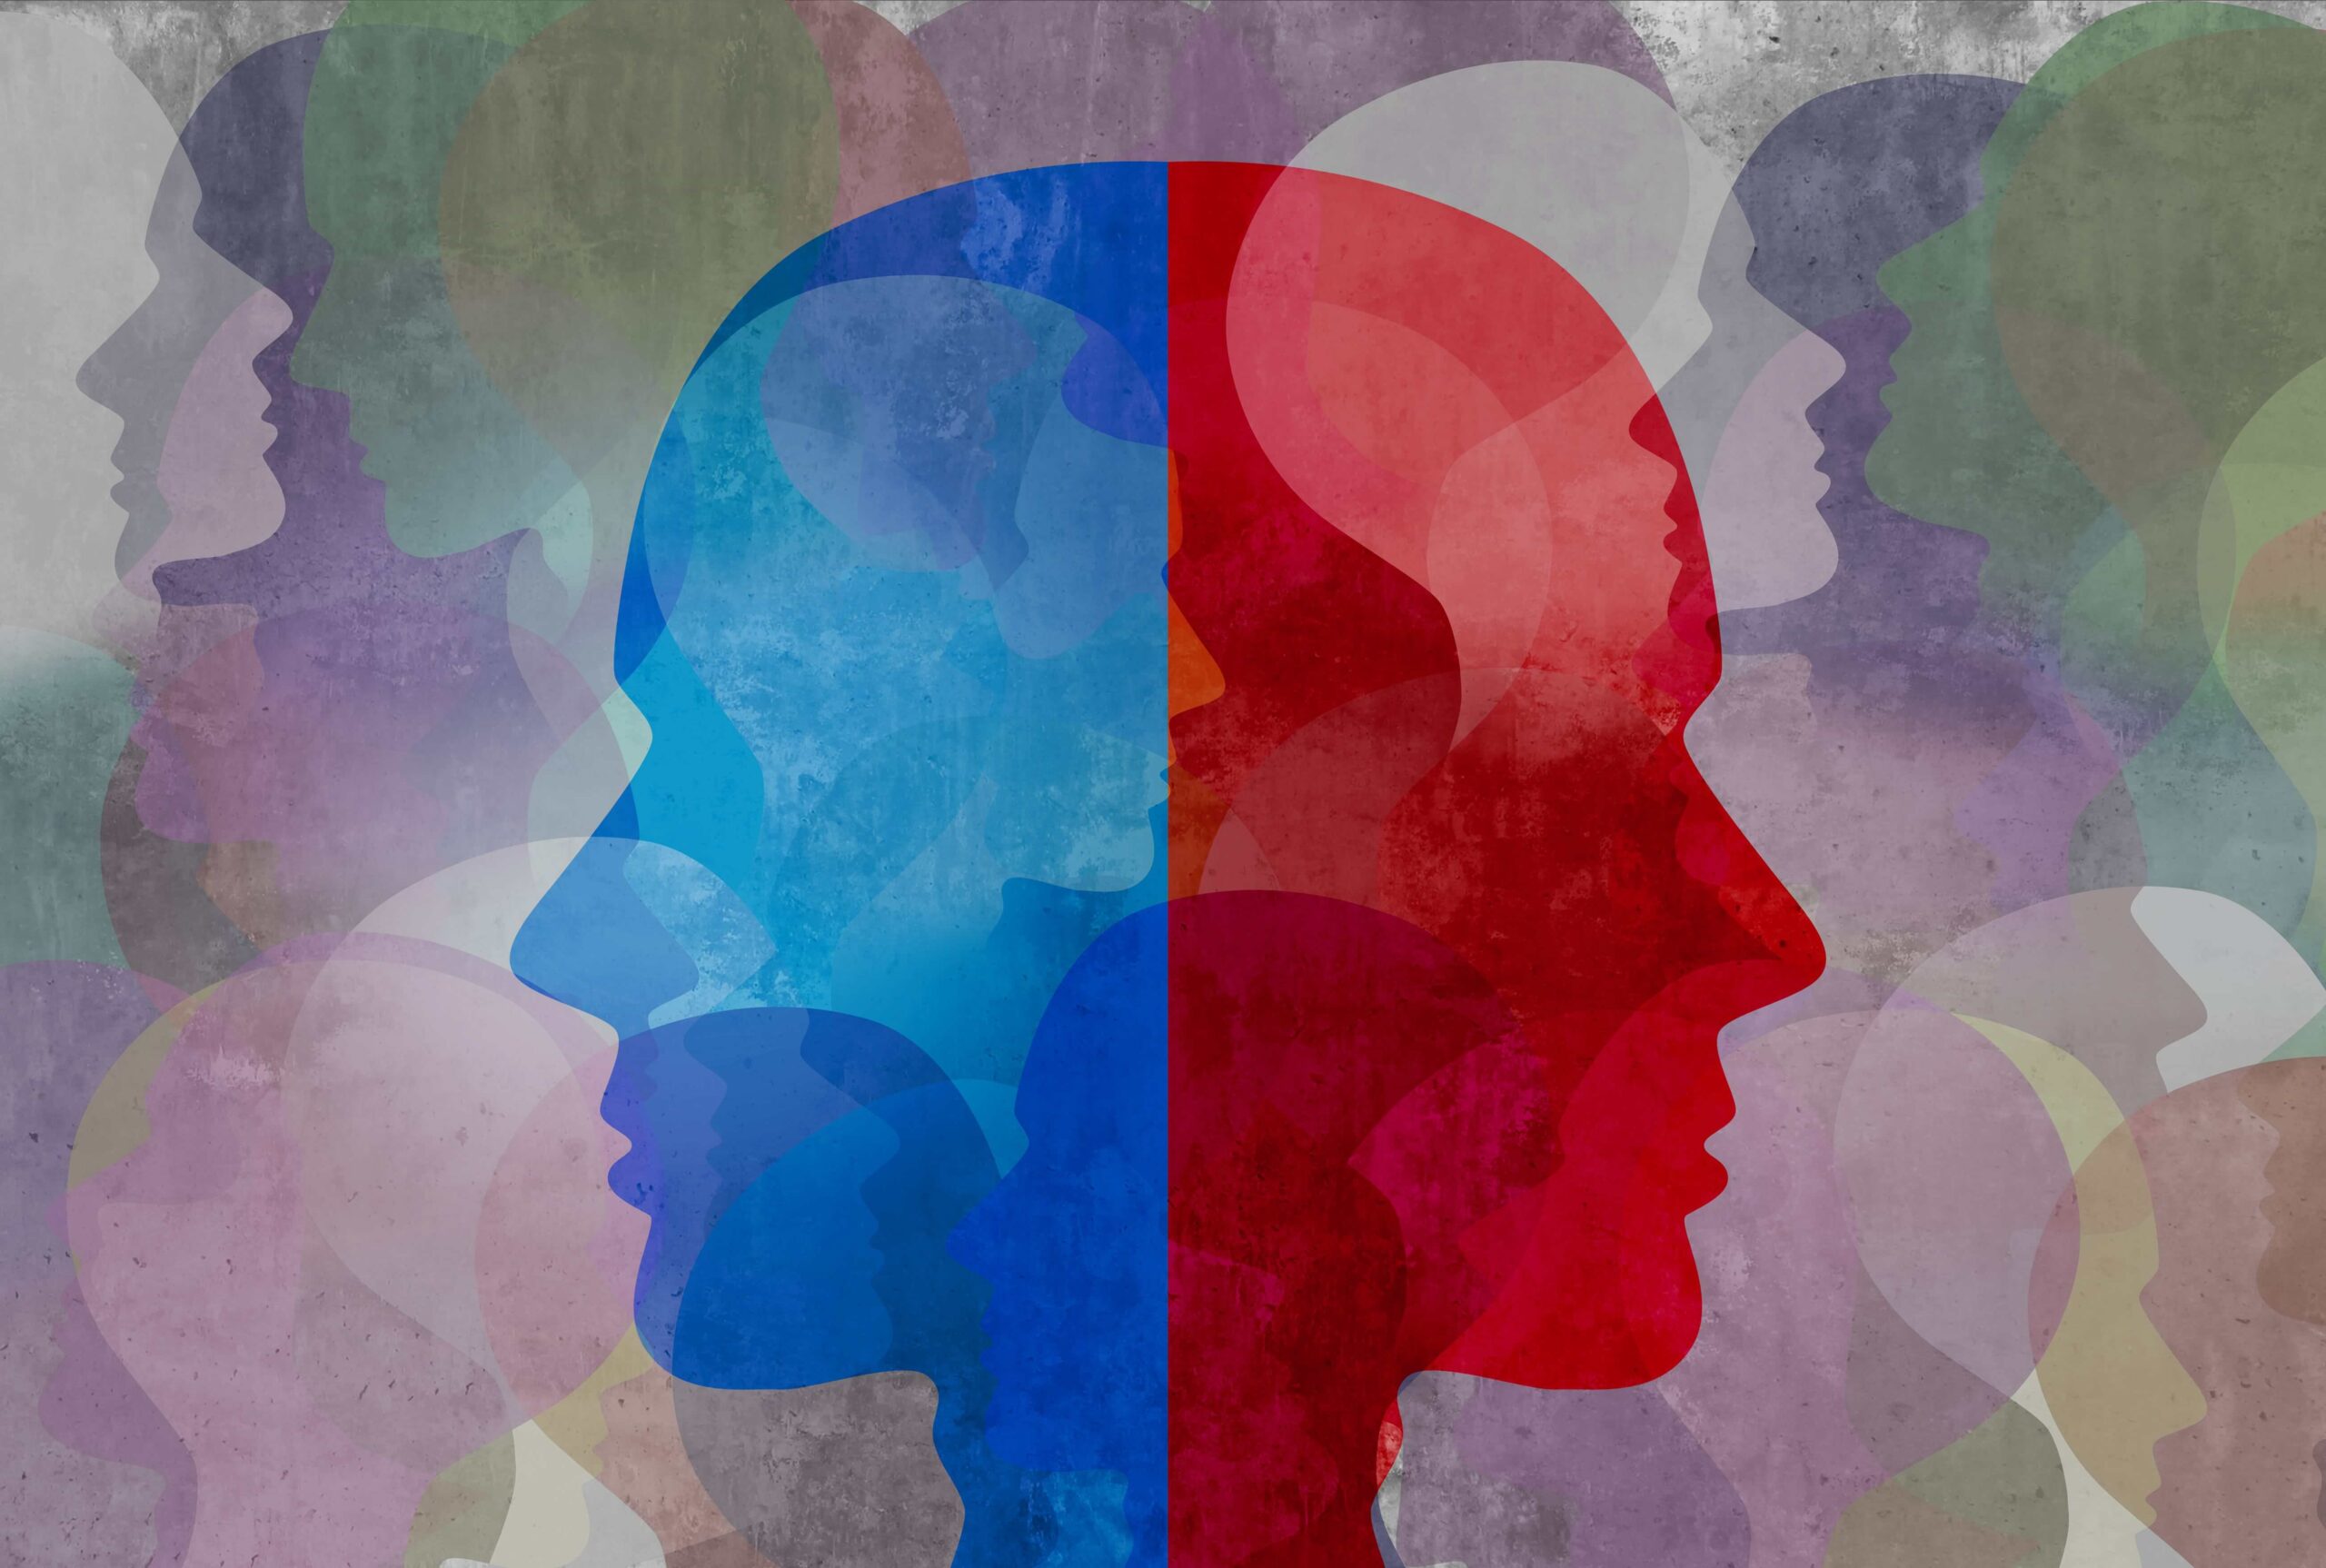 two profiles depicting multiple mental health disorders